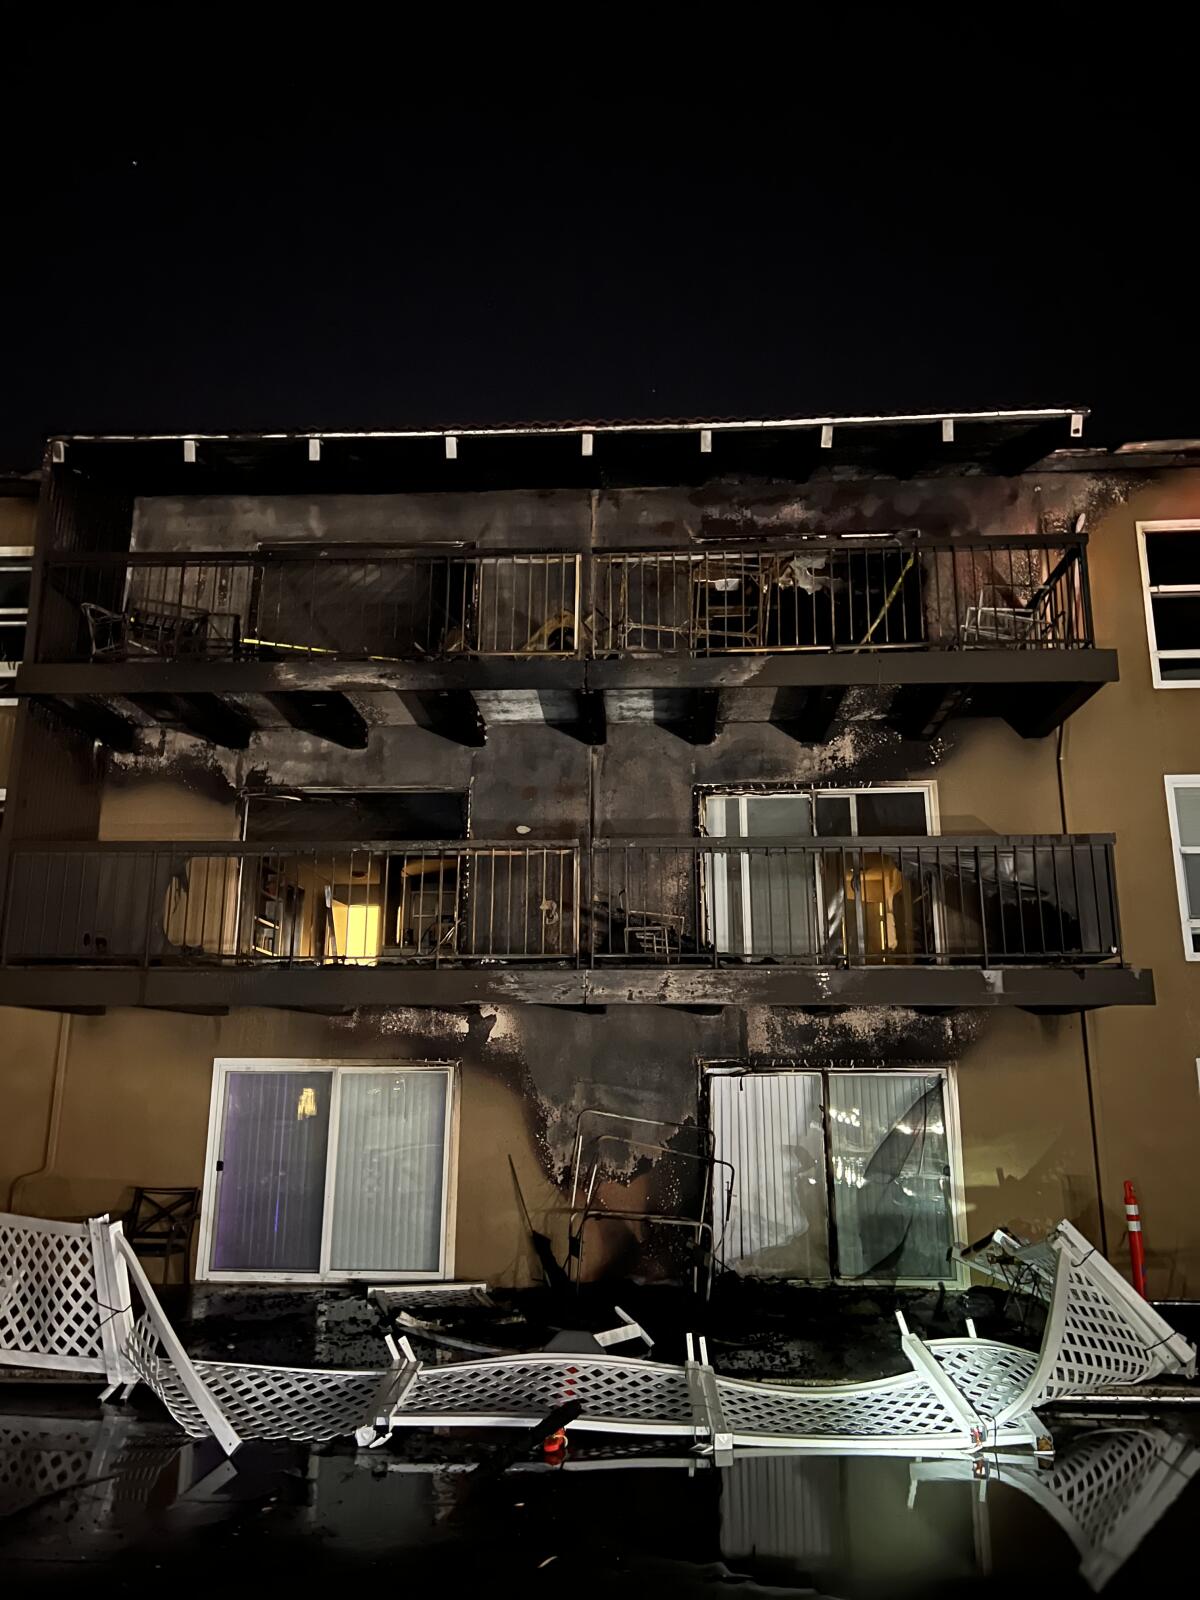 A structure fire Wednesday night damaged six apartment units, displacing its current residents. No one was injured.